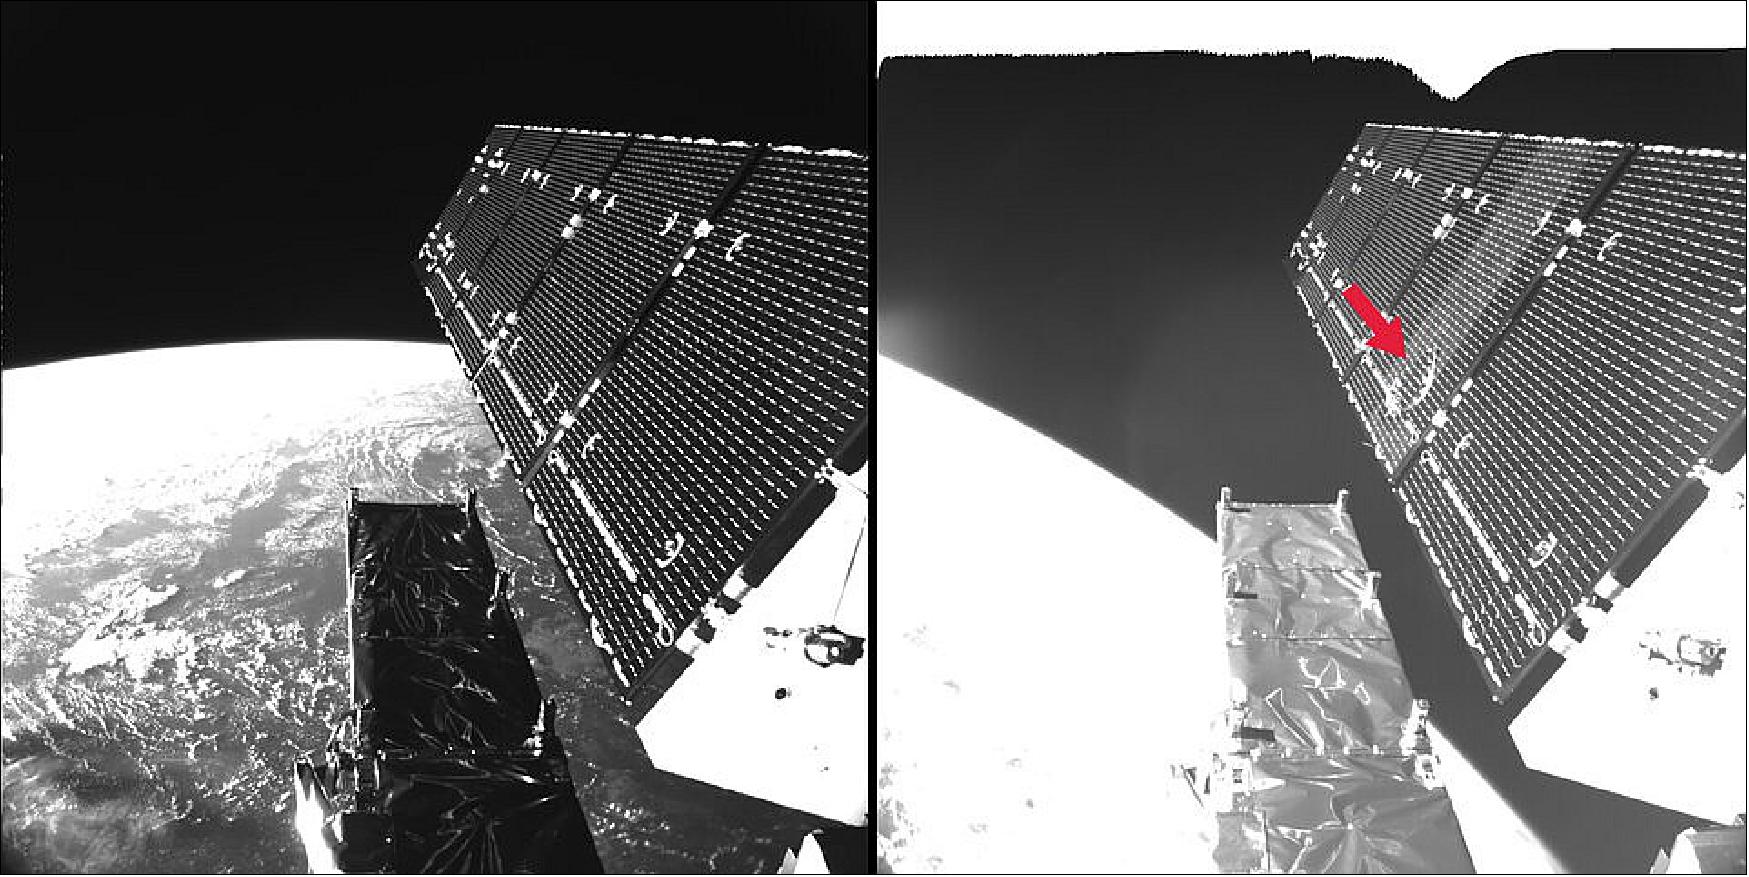 Figure 34: The picture shows Sentinel-1A’s solar array before and after the impact of a mm-size particle on the second panel. The damaged area has a diameter of about 40 cm, which is consistent on this structure with the impact of a fragment of less than 5 mm in size (image credit: ESA)